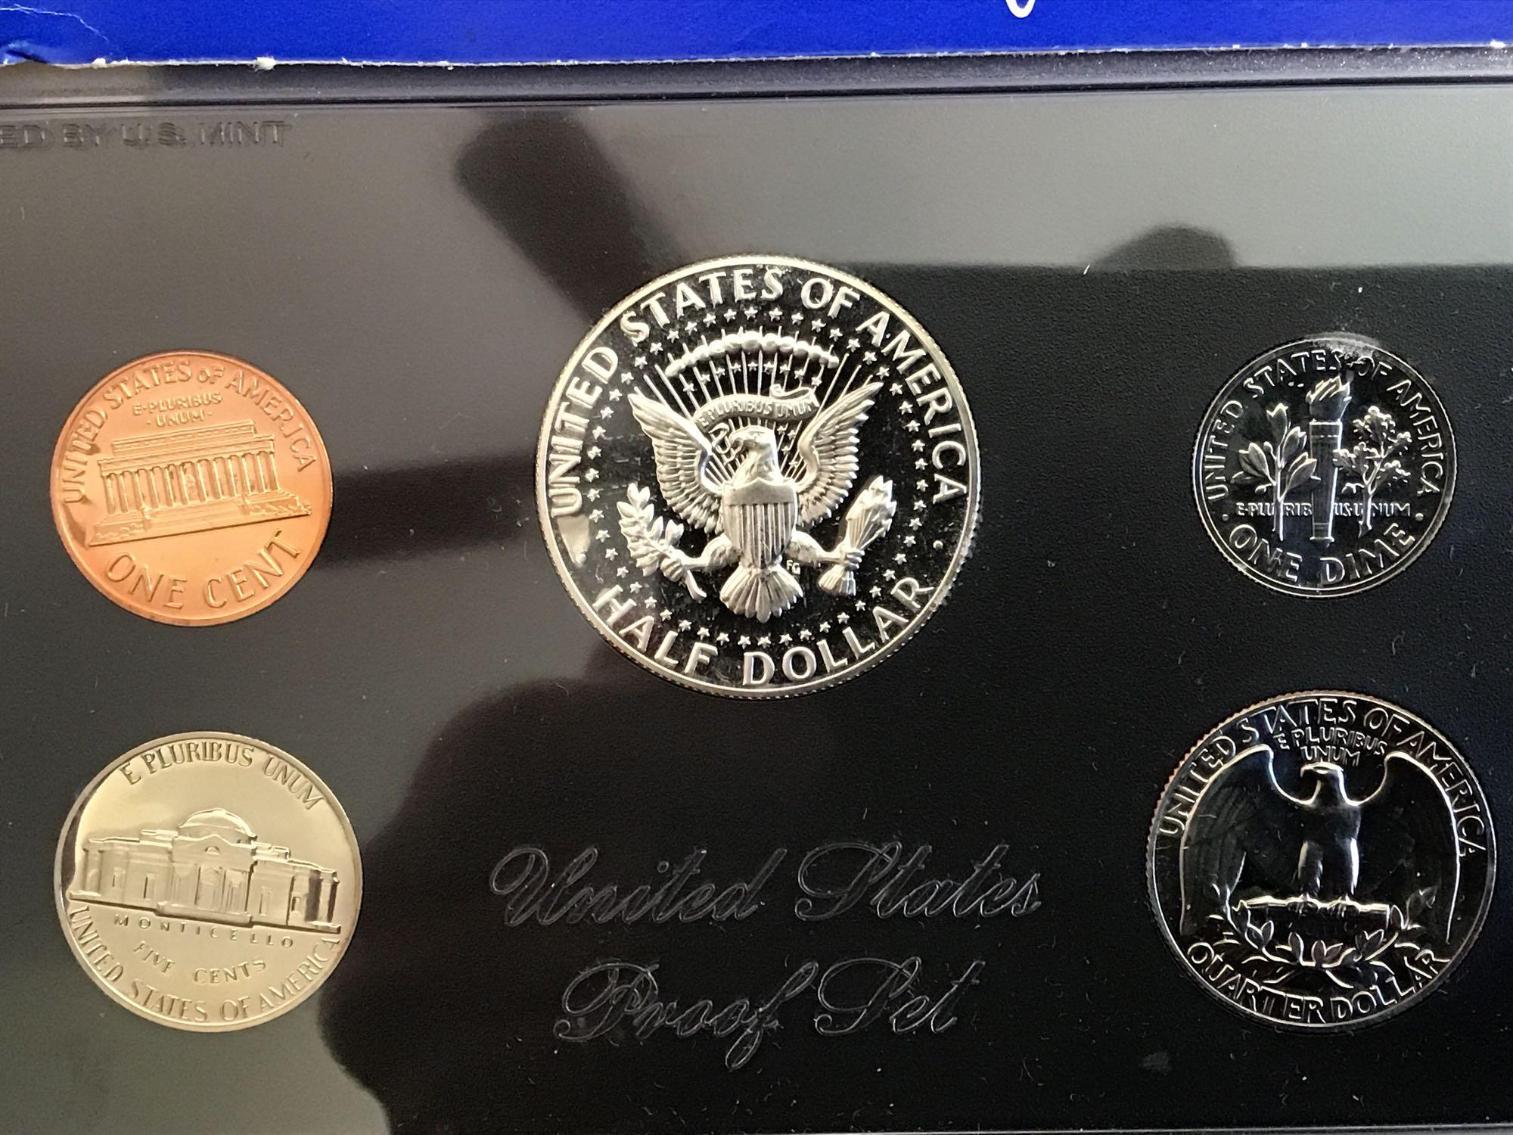 Image for 1970 Proof Set